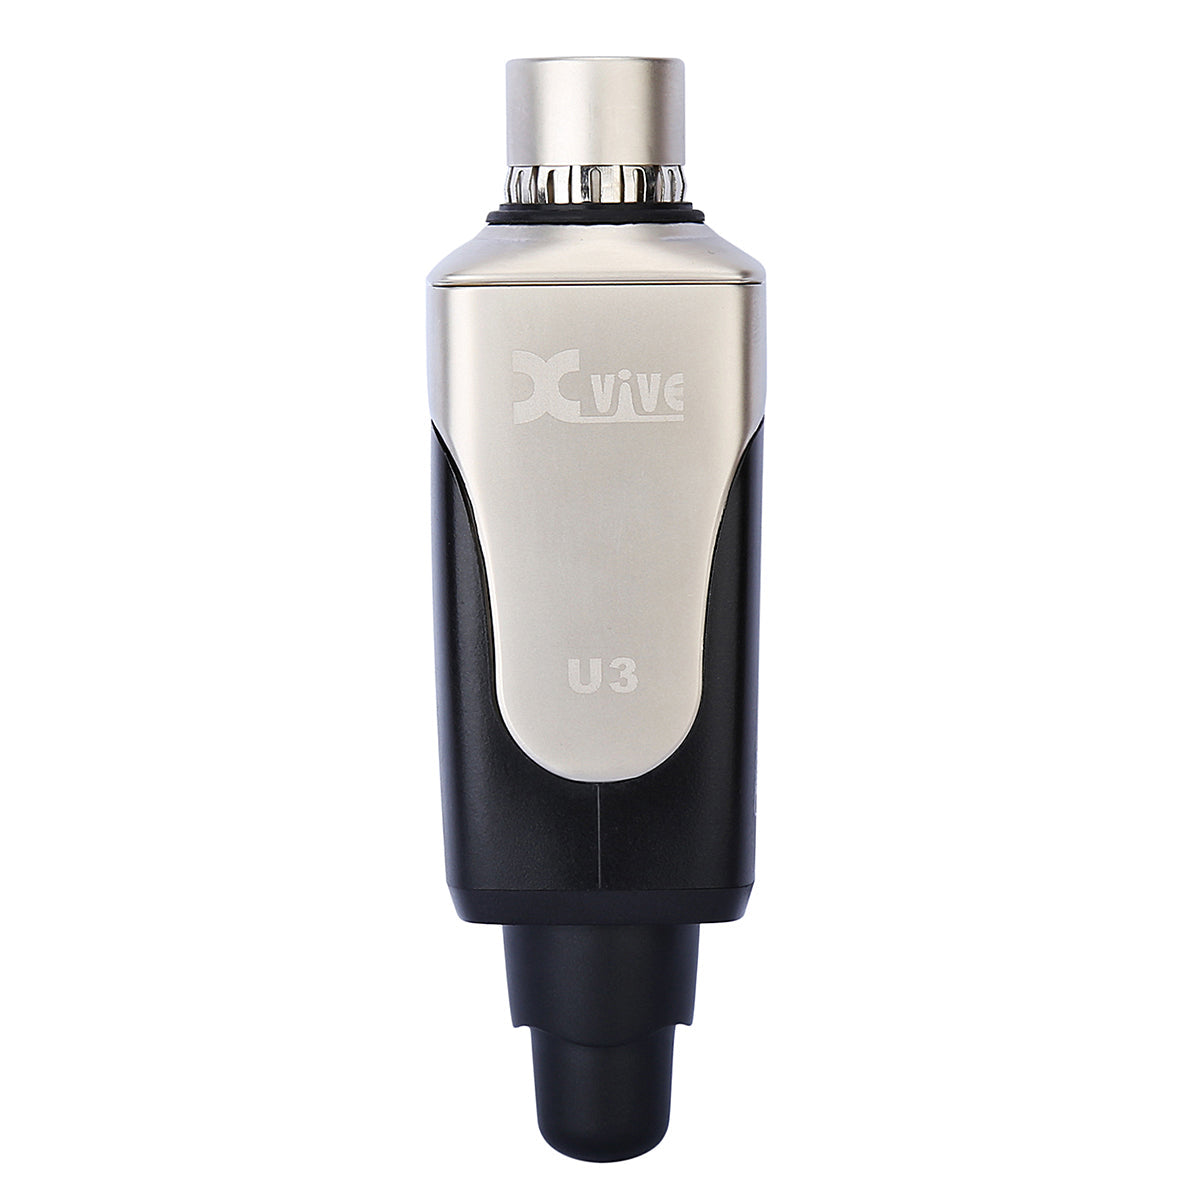 Xvive Microphone Wireless System  ~ Transmitter, Wireless IEM & Mic Systems for sale at Richards Guitars.